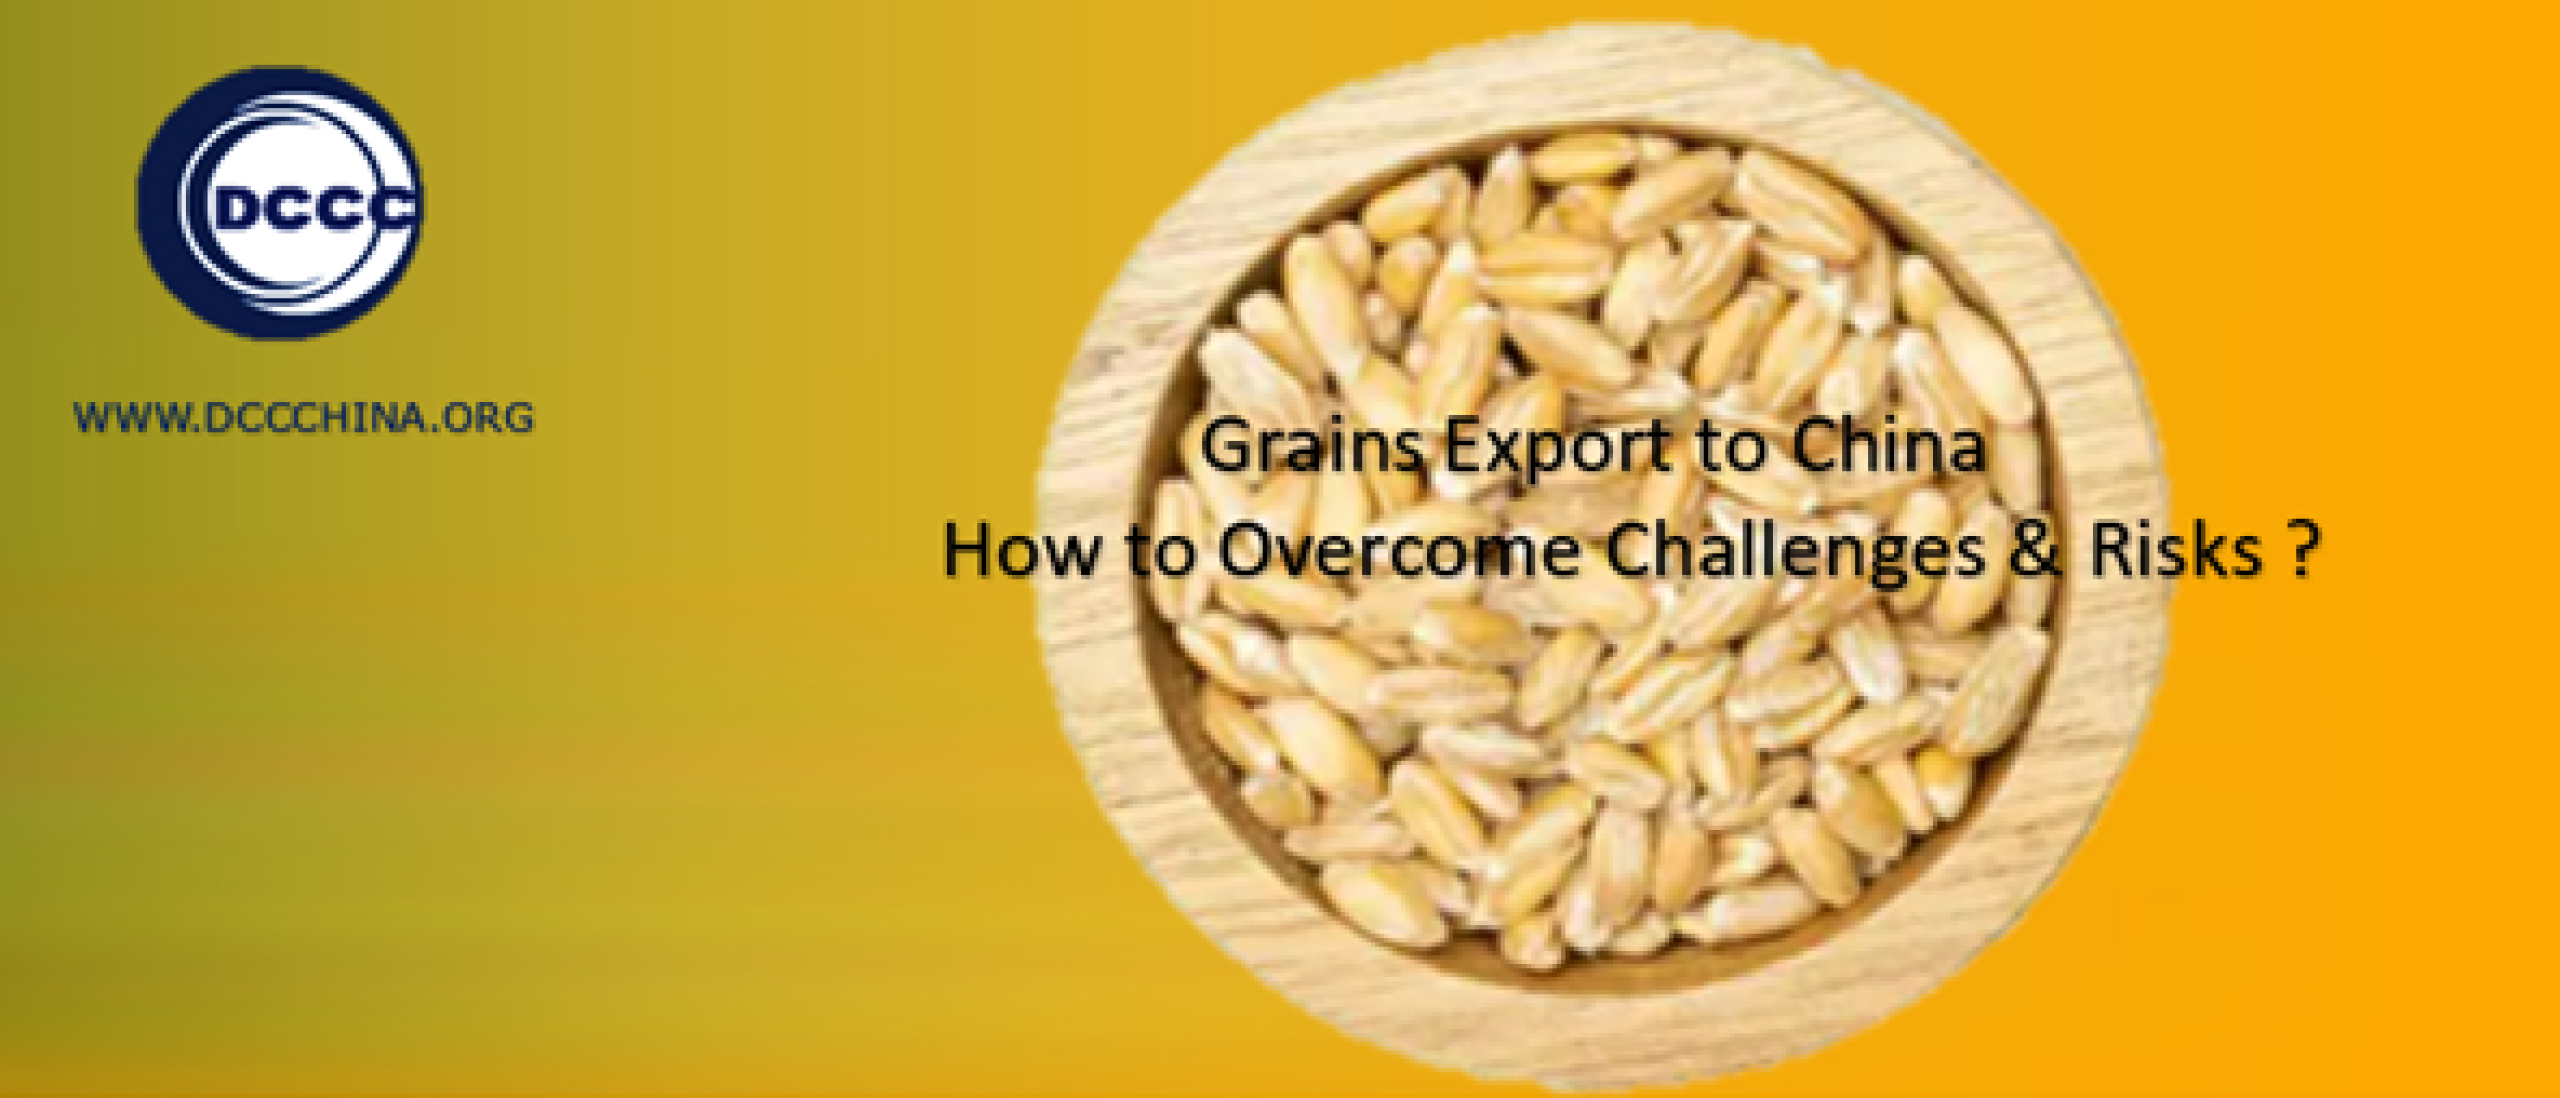 How to overcome challenges and risks grains export to China